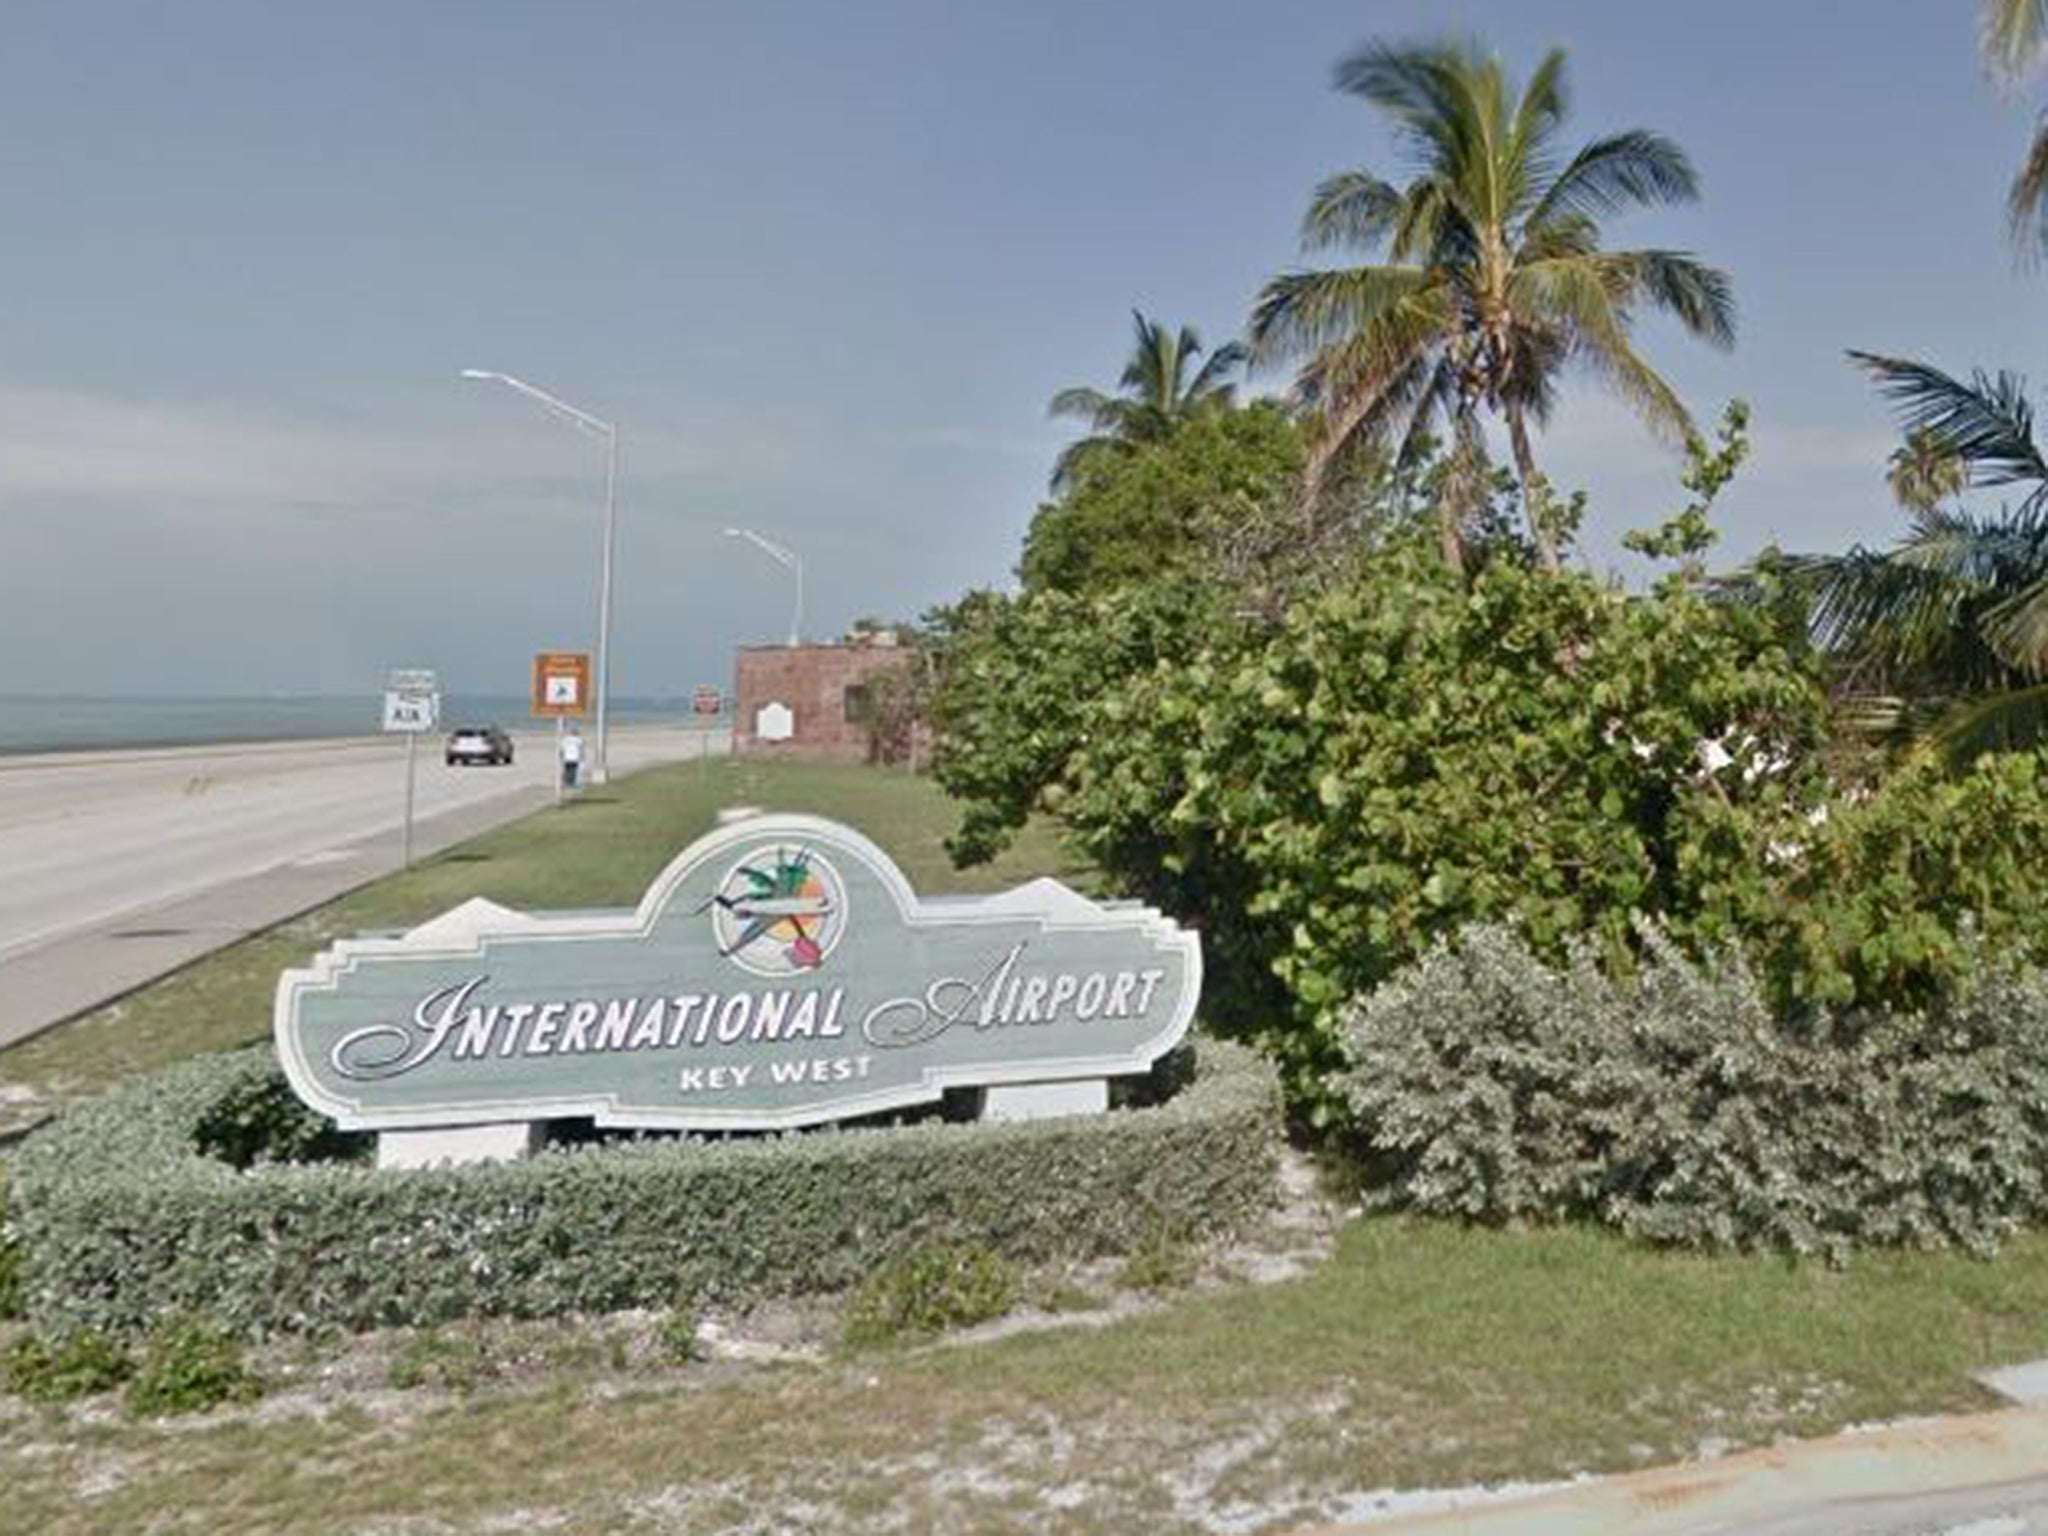 Police said a woman lost her arm after it came in contact with the propeller of a private aircraft on Saturday at the Key West International Airport in Florida.